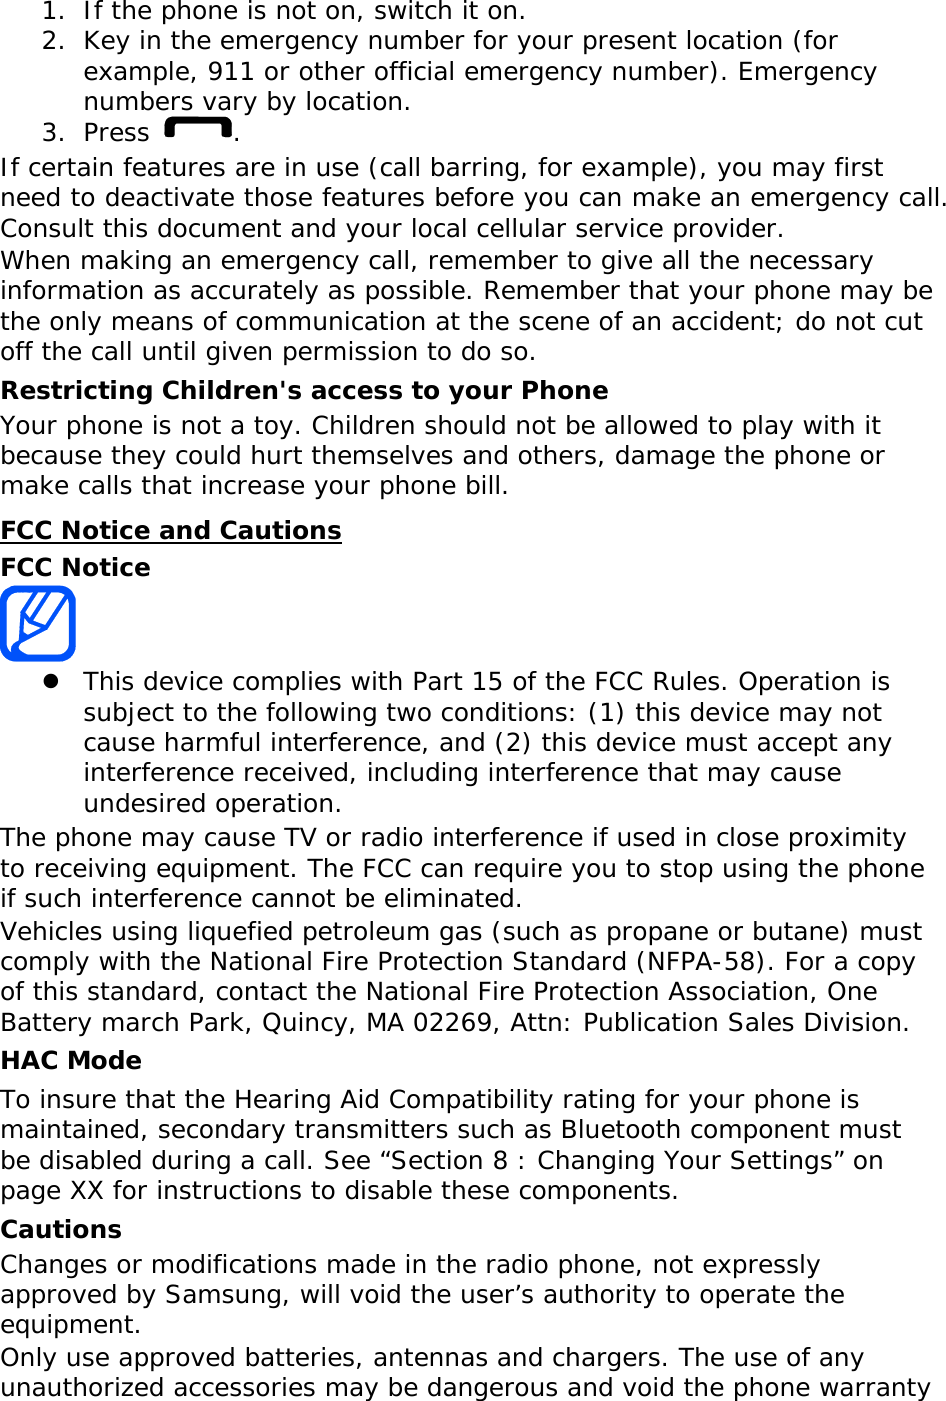 1. If the phone is not on, switch it on. 2. Key in the emergency number for your present location (for example, 911 or other official emergency number). Emergency numbers vary by location. 3. Press  . If certain features are in use (call barring, for example), you may first need to deactivate those features before you can make an emergency call. Consult this document and your local cellular service provider. When making an emergency call, remember to give all the necessary information as accurately as possible. Remember that your phone may be the only means of communication at the scene of an accident; do not cut off the call until given permission to do so. Restricting Children&apos;s access to your Phone Your phone is not a toy. Children should not be allowed to play with it because they could hurt themselves and others, damage the phone or make calls that increase your phone bill. FCC Notice and Cautions FCC Notice   z This device complies with Part 15 of the FCC Rules. Operation is subject to the following two conditions: (1) this device may not cause harmful interference, and (2) this device must accept any interference received, including interference that may cause undesired operation. The phone may cause TV or radio interference if used in close proximity to receiving equipment. The FCC can require you to stop using the phone if such interference cannot be eliminated. Vehicles using liquefied petroleum gas (such as propane or butane) must comply with the National Fire Protection Standard (NFPA-58). For a copy of this standard, contact the National Fire Protection Association, One Battery march Park, Quincy, MA 02269, Attn: Publication Sales Division. HAC Mode To insure that the Hearing Aid Compatibility rating for your phone is maintained, secondary transmitters such as Bluetooth component must be disabled during a call. See “Section 8 : Changing Your Settings” on page XX for instructions to disable these components. Cautions Changes or modifications made in the radio phone, not expressly approved by Samsung, will void the user’s authority to operate the equipment. Only use approved batteries, antennas and chargers. The use of any unauthorized accessories may be dangerous and void the phone warranty 